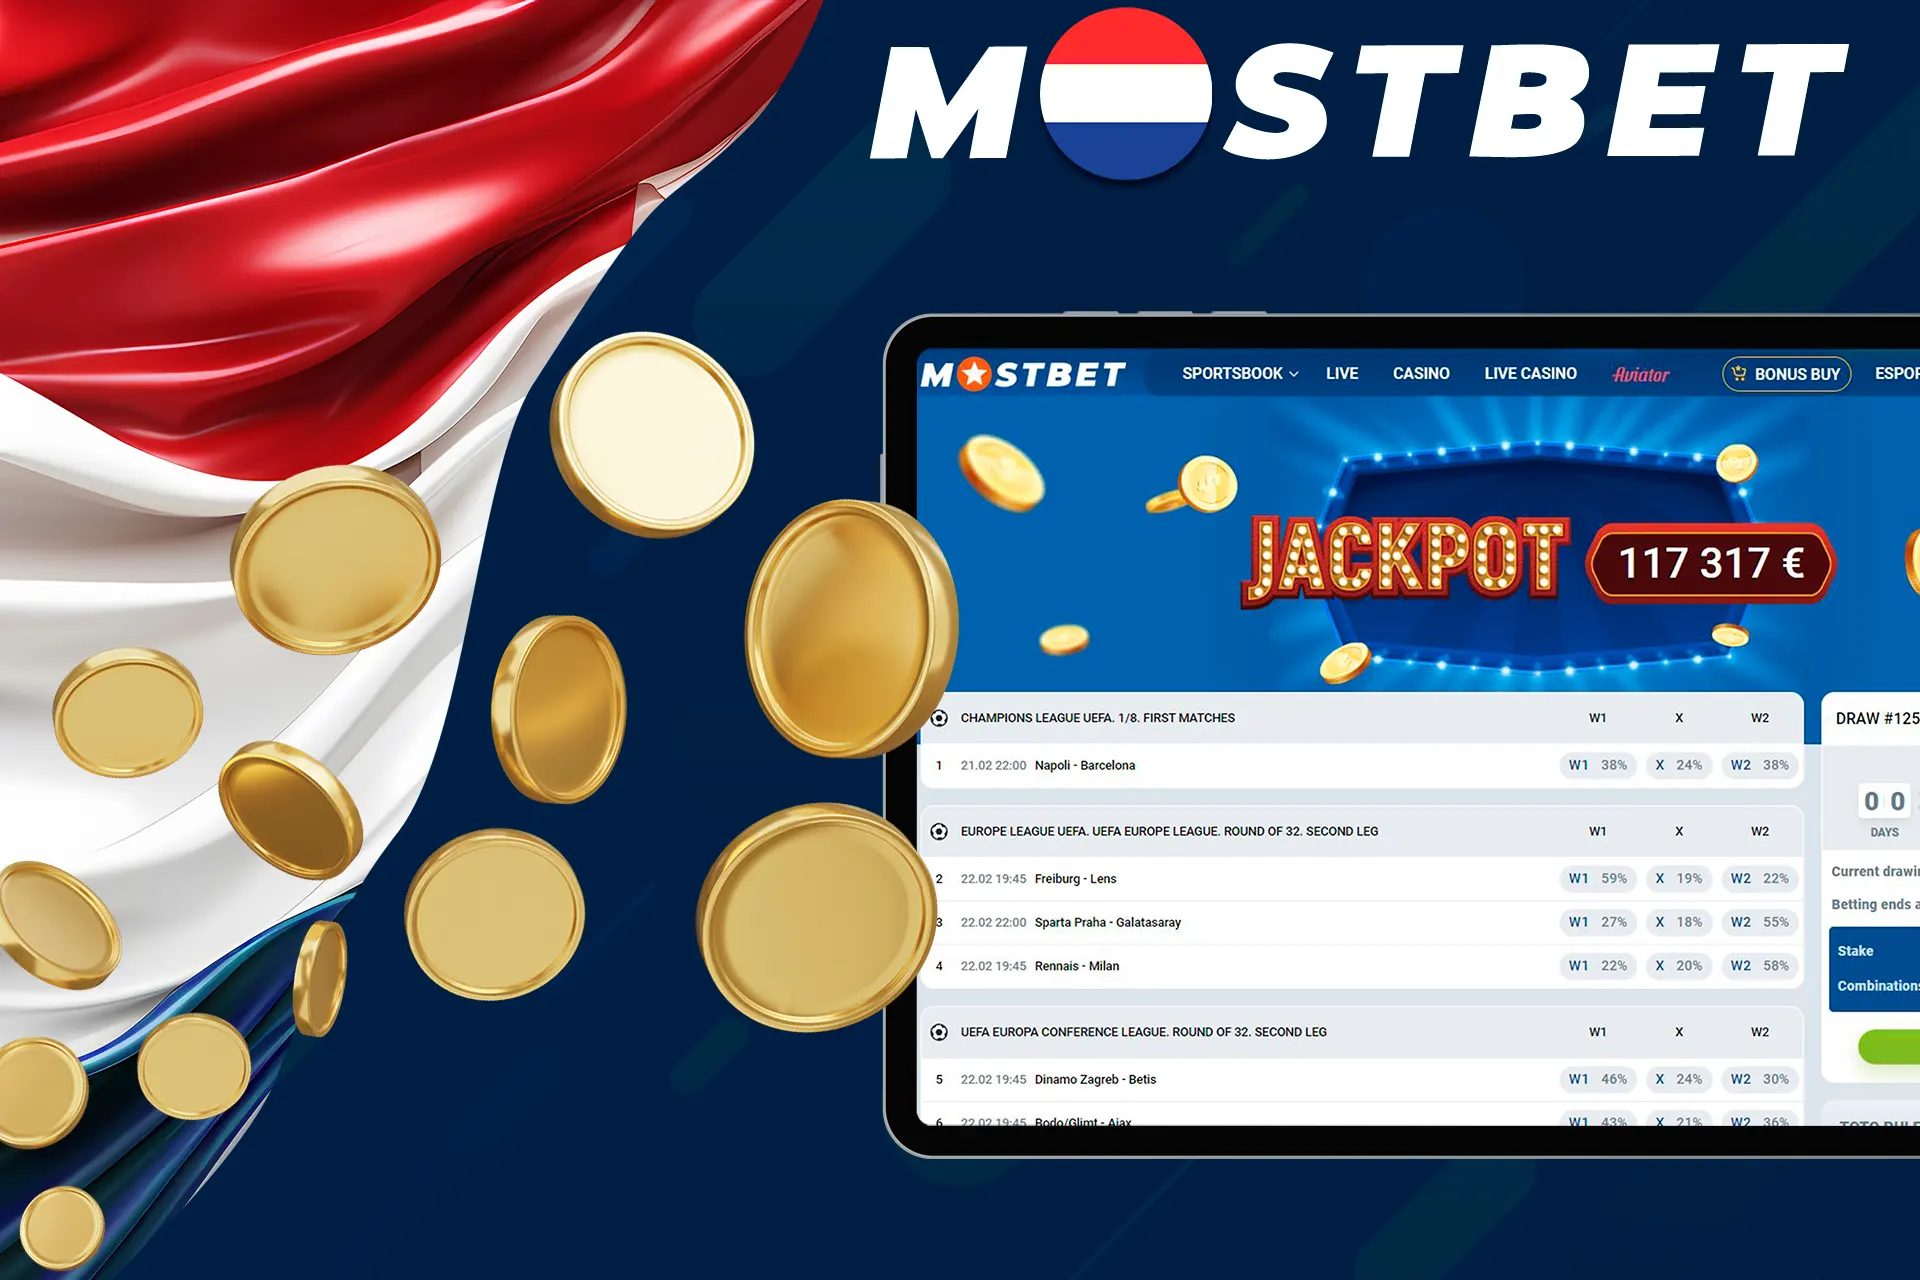 Got a jackpot playing in Mostbet TOTO